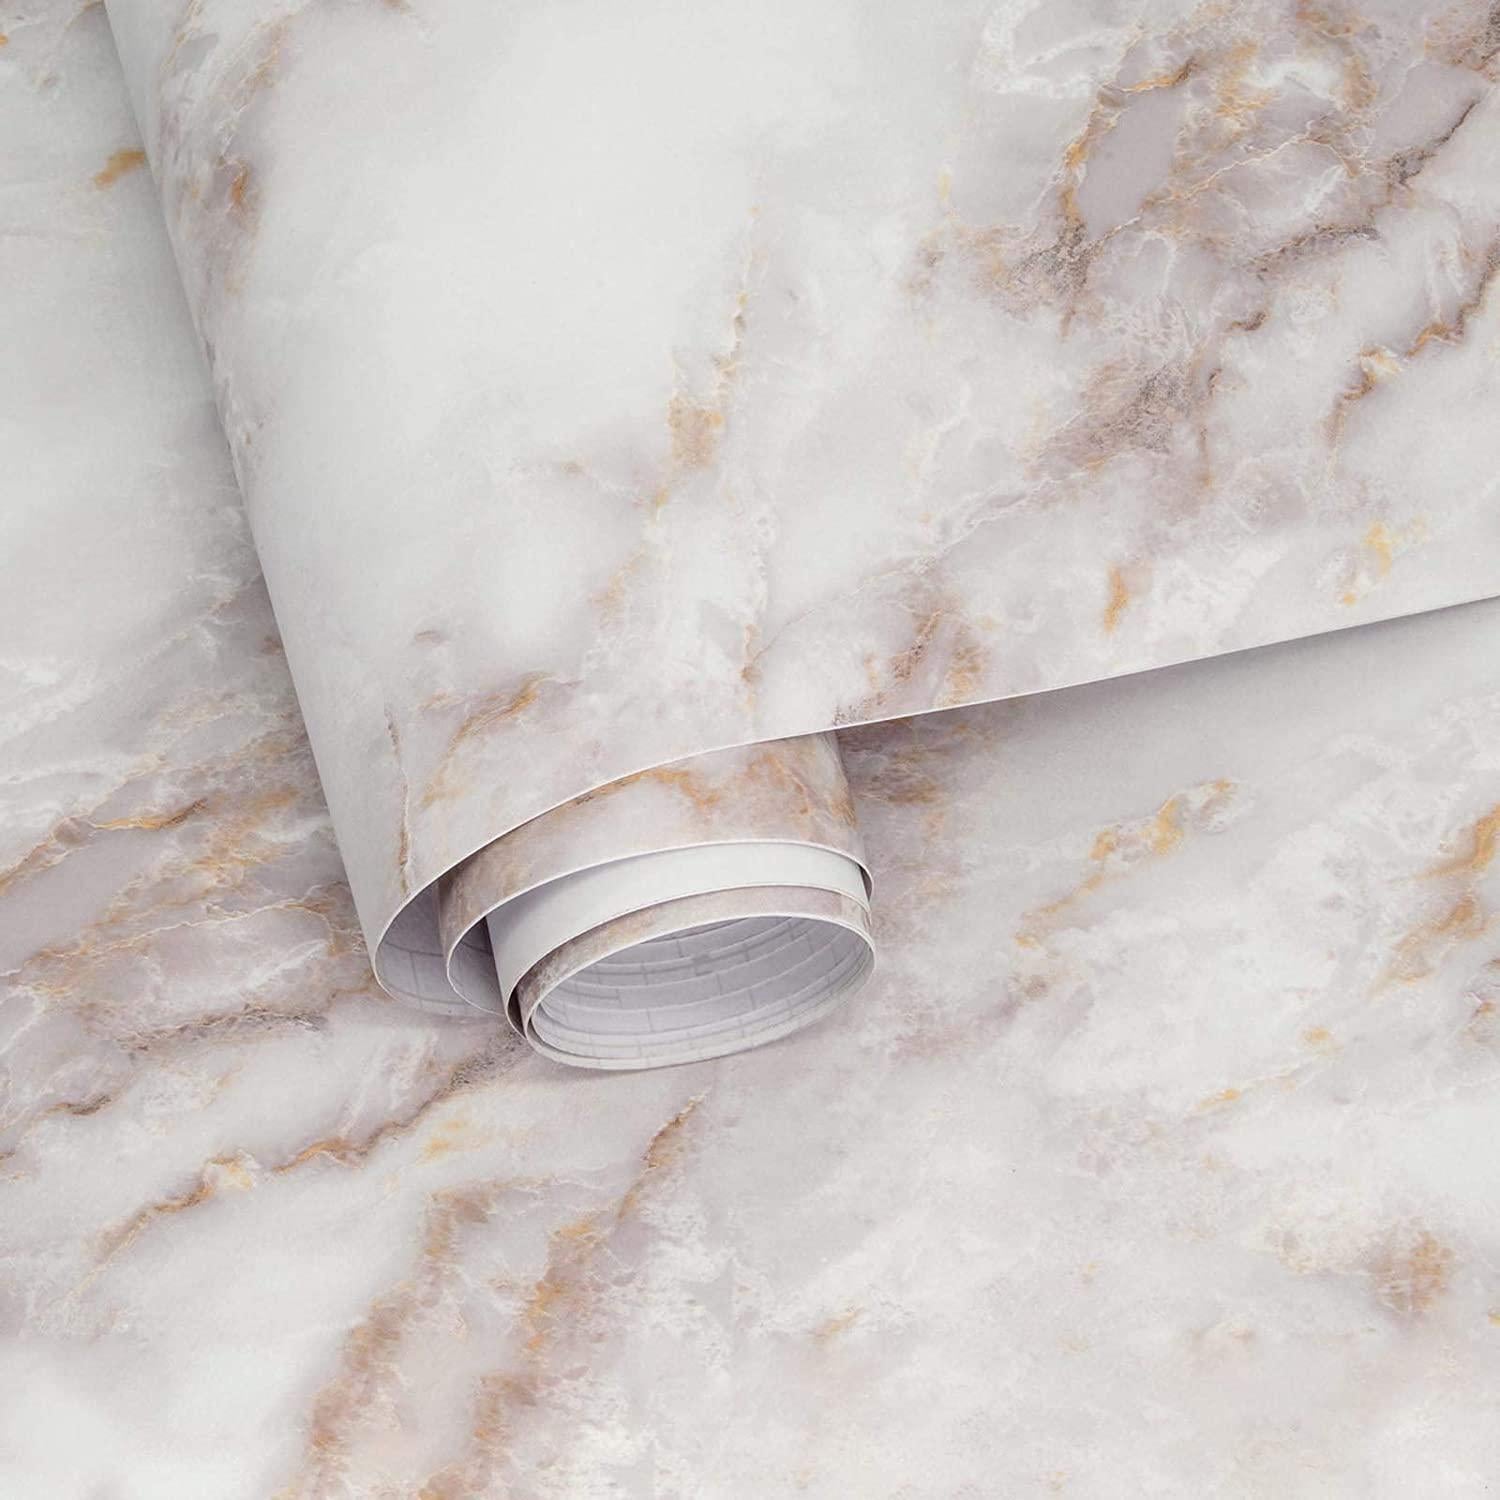 Abyssaly, Marble Paper Film Peel and Stick Countertops Vinyl Wallpaper Thick Waterproof Self Adhesive Removable Authentic White Granite Look Marble Decorative Shelf Liner, Vinyl, White, 11.8 X 120